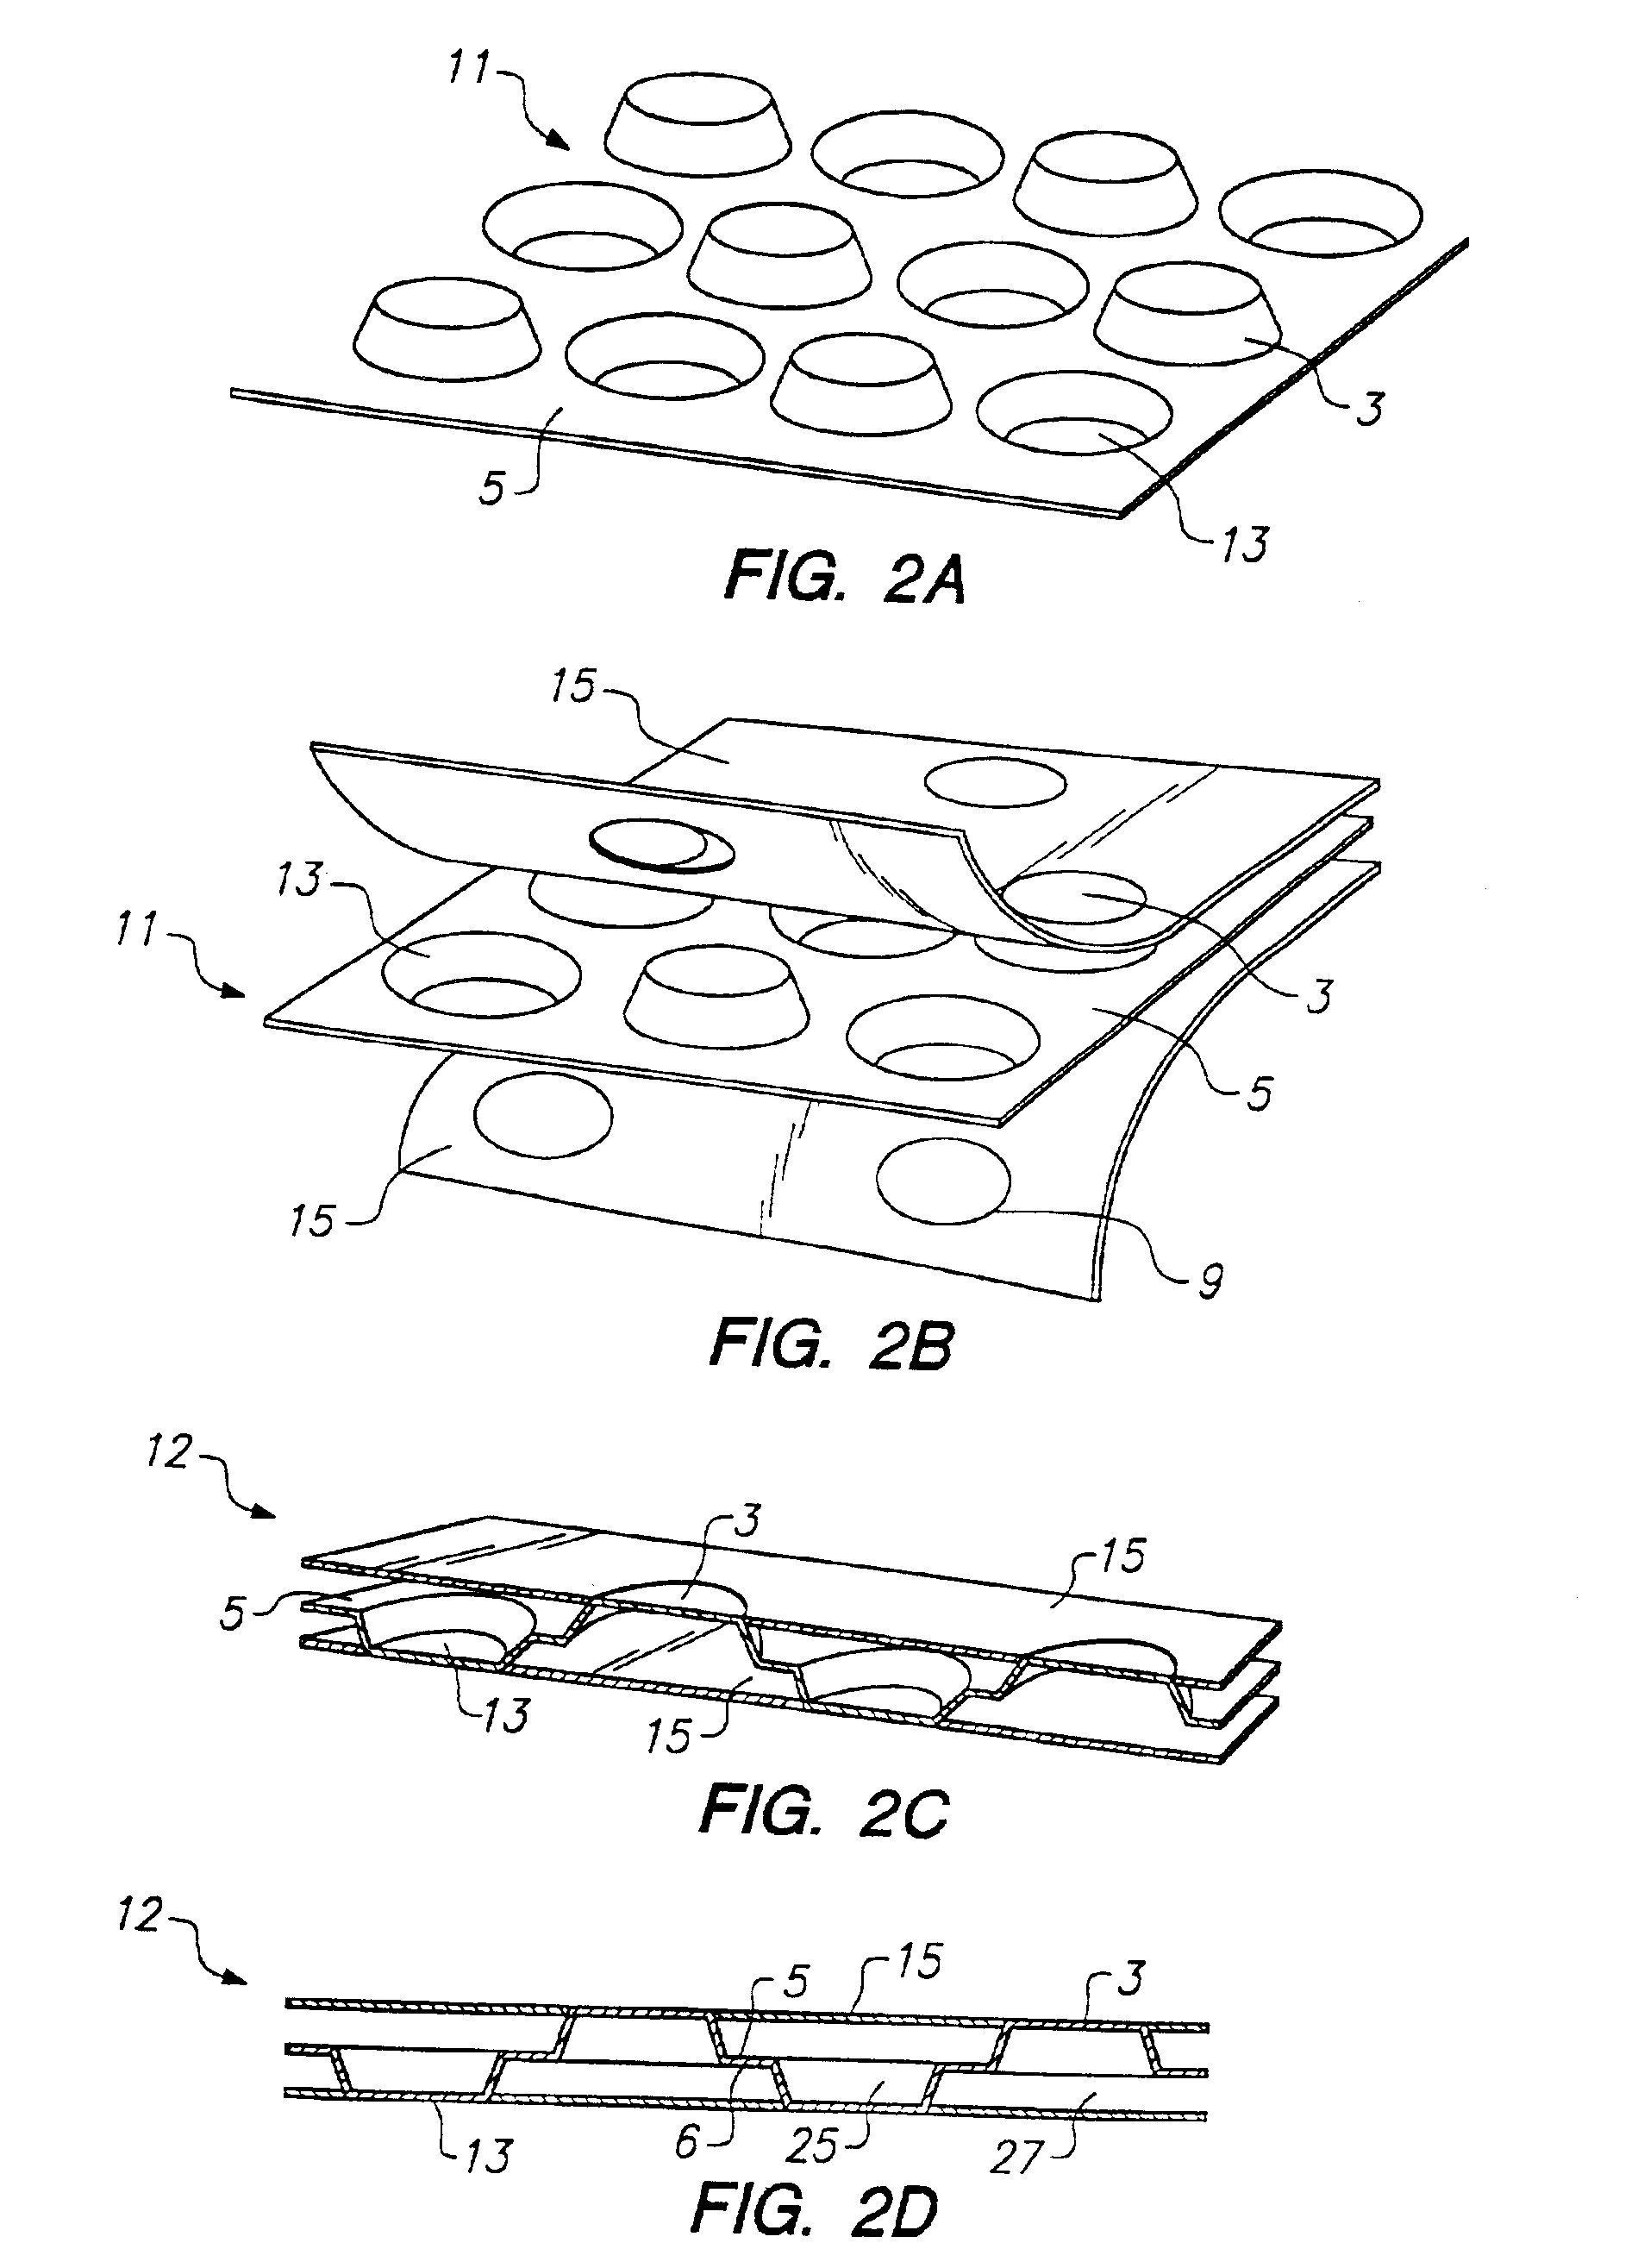 Structural dimple panel